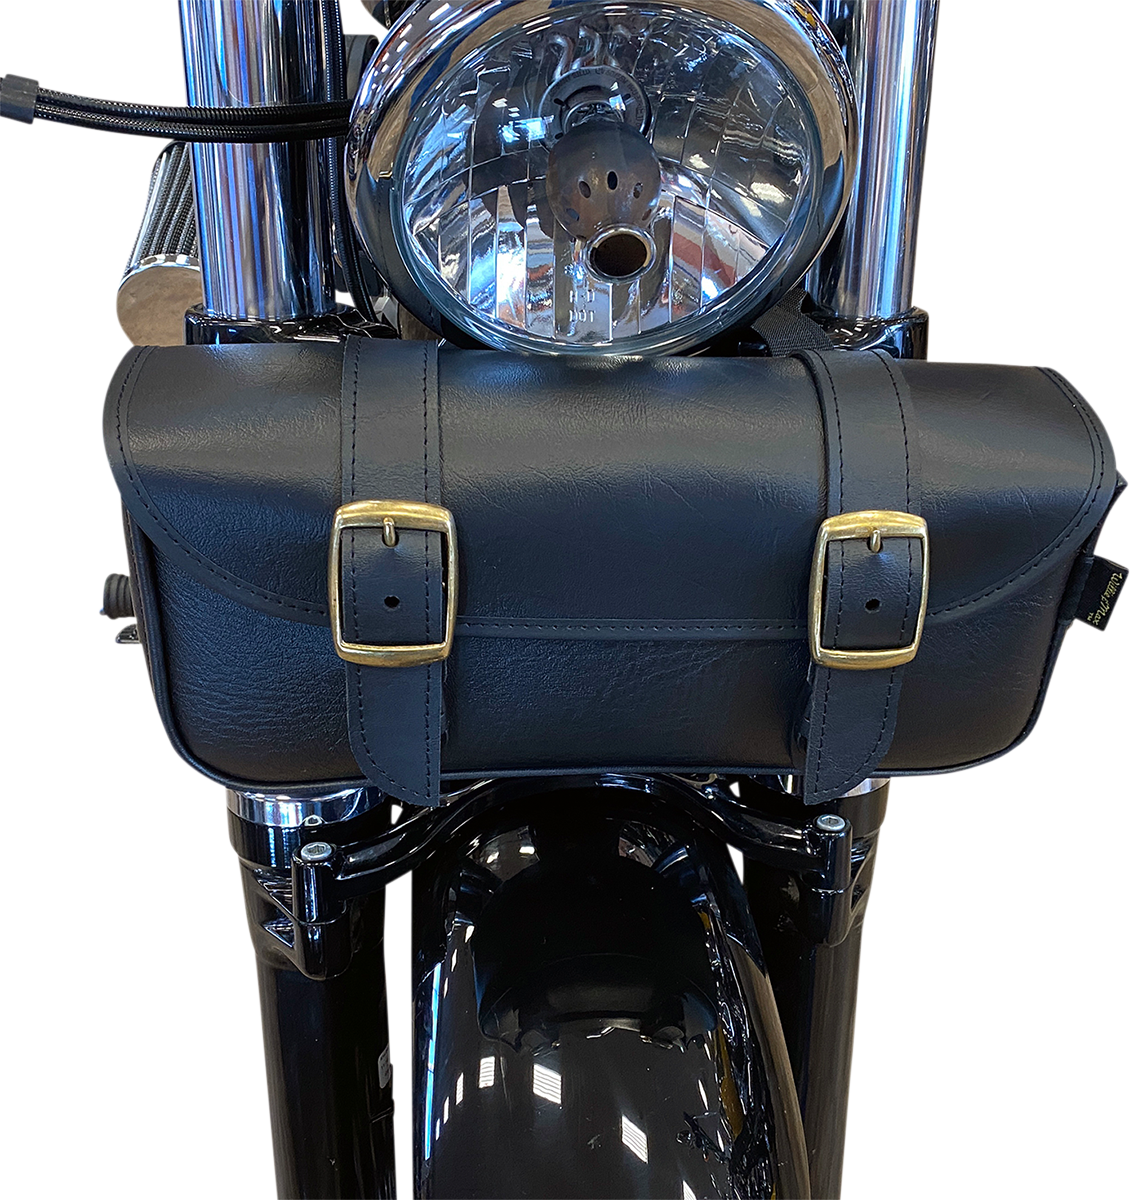 Willie & Max Brass Money Universal Motorcycle Front Fork Tool Bag Pouch Harley